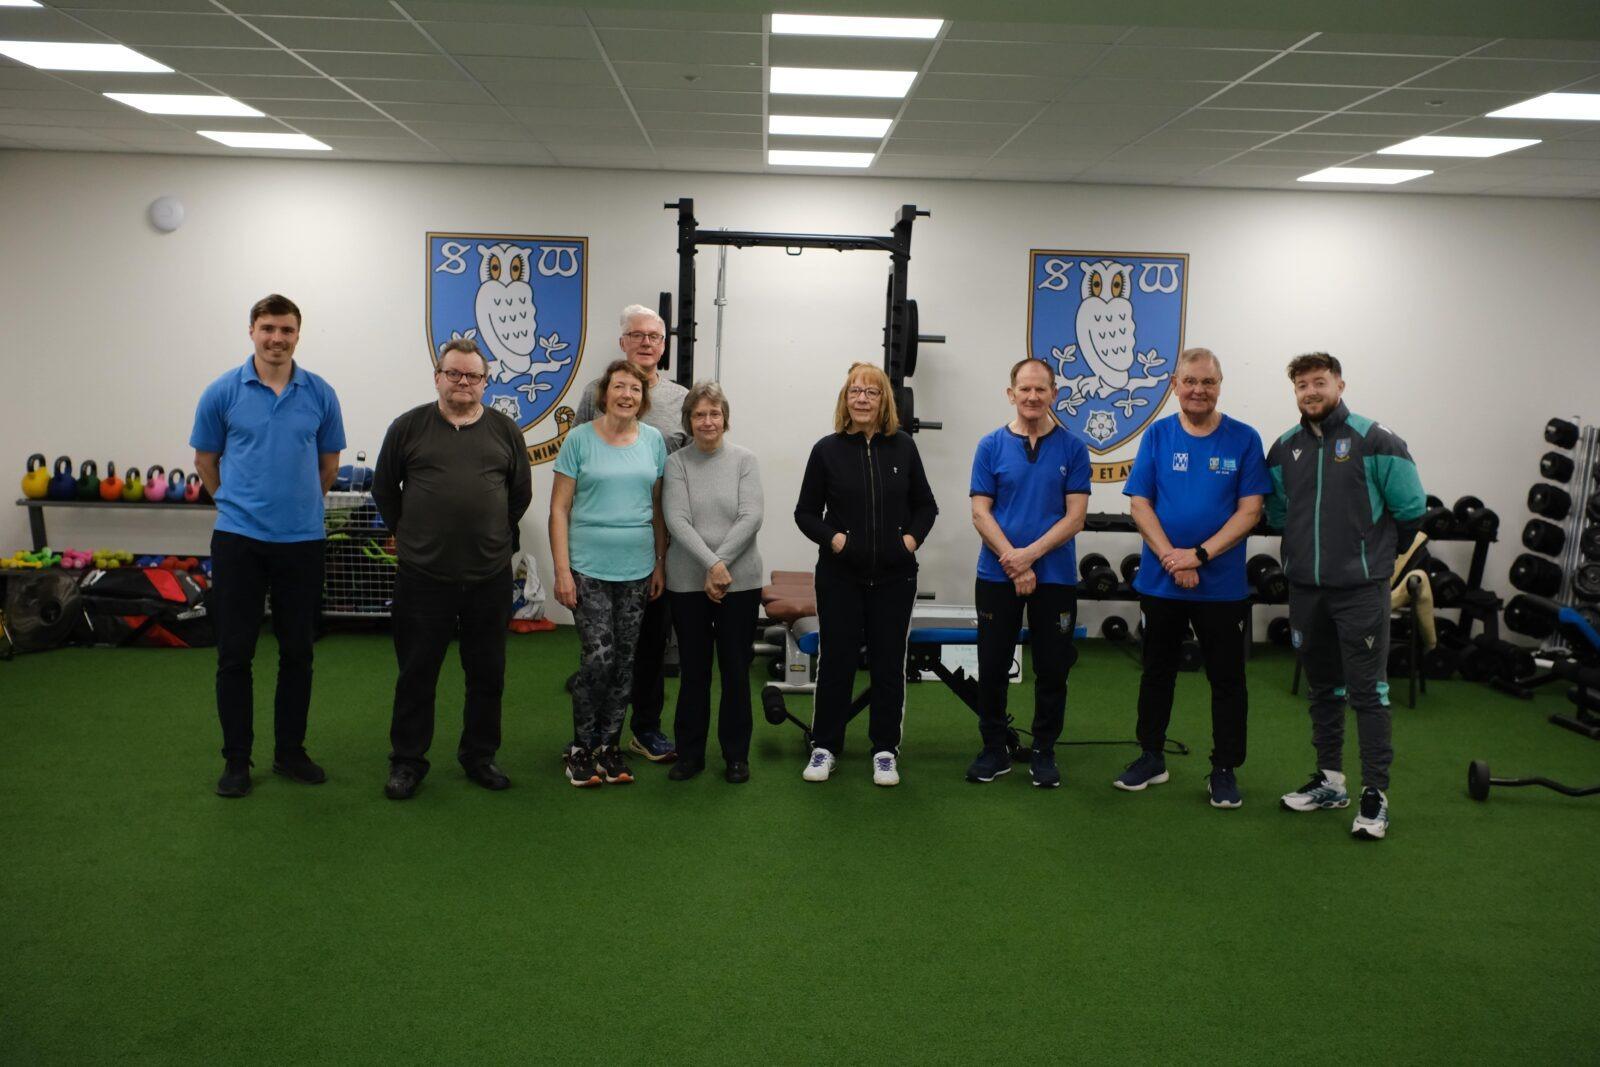 Football club offers free osteoarthritis exercise classes